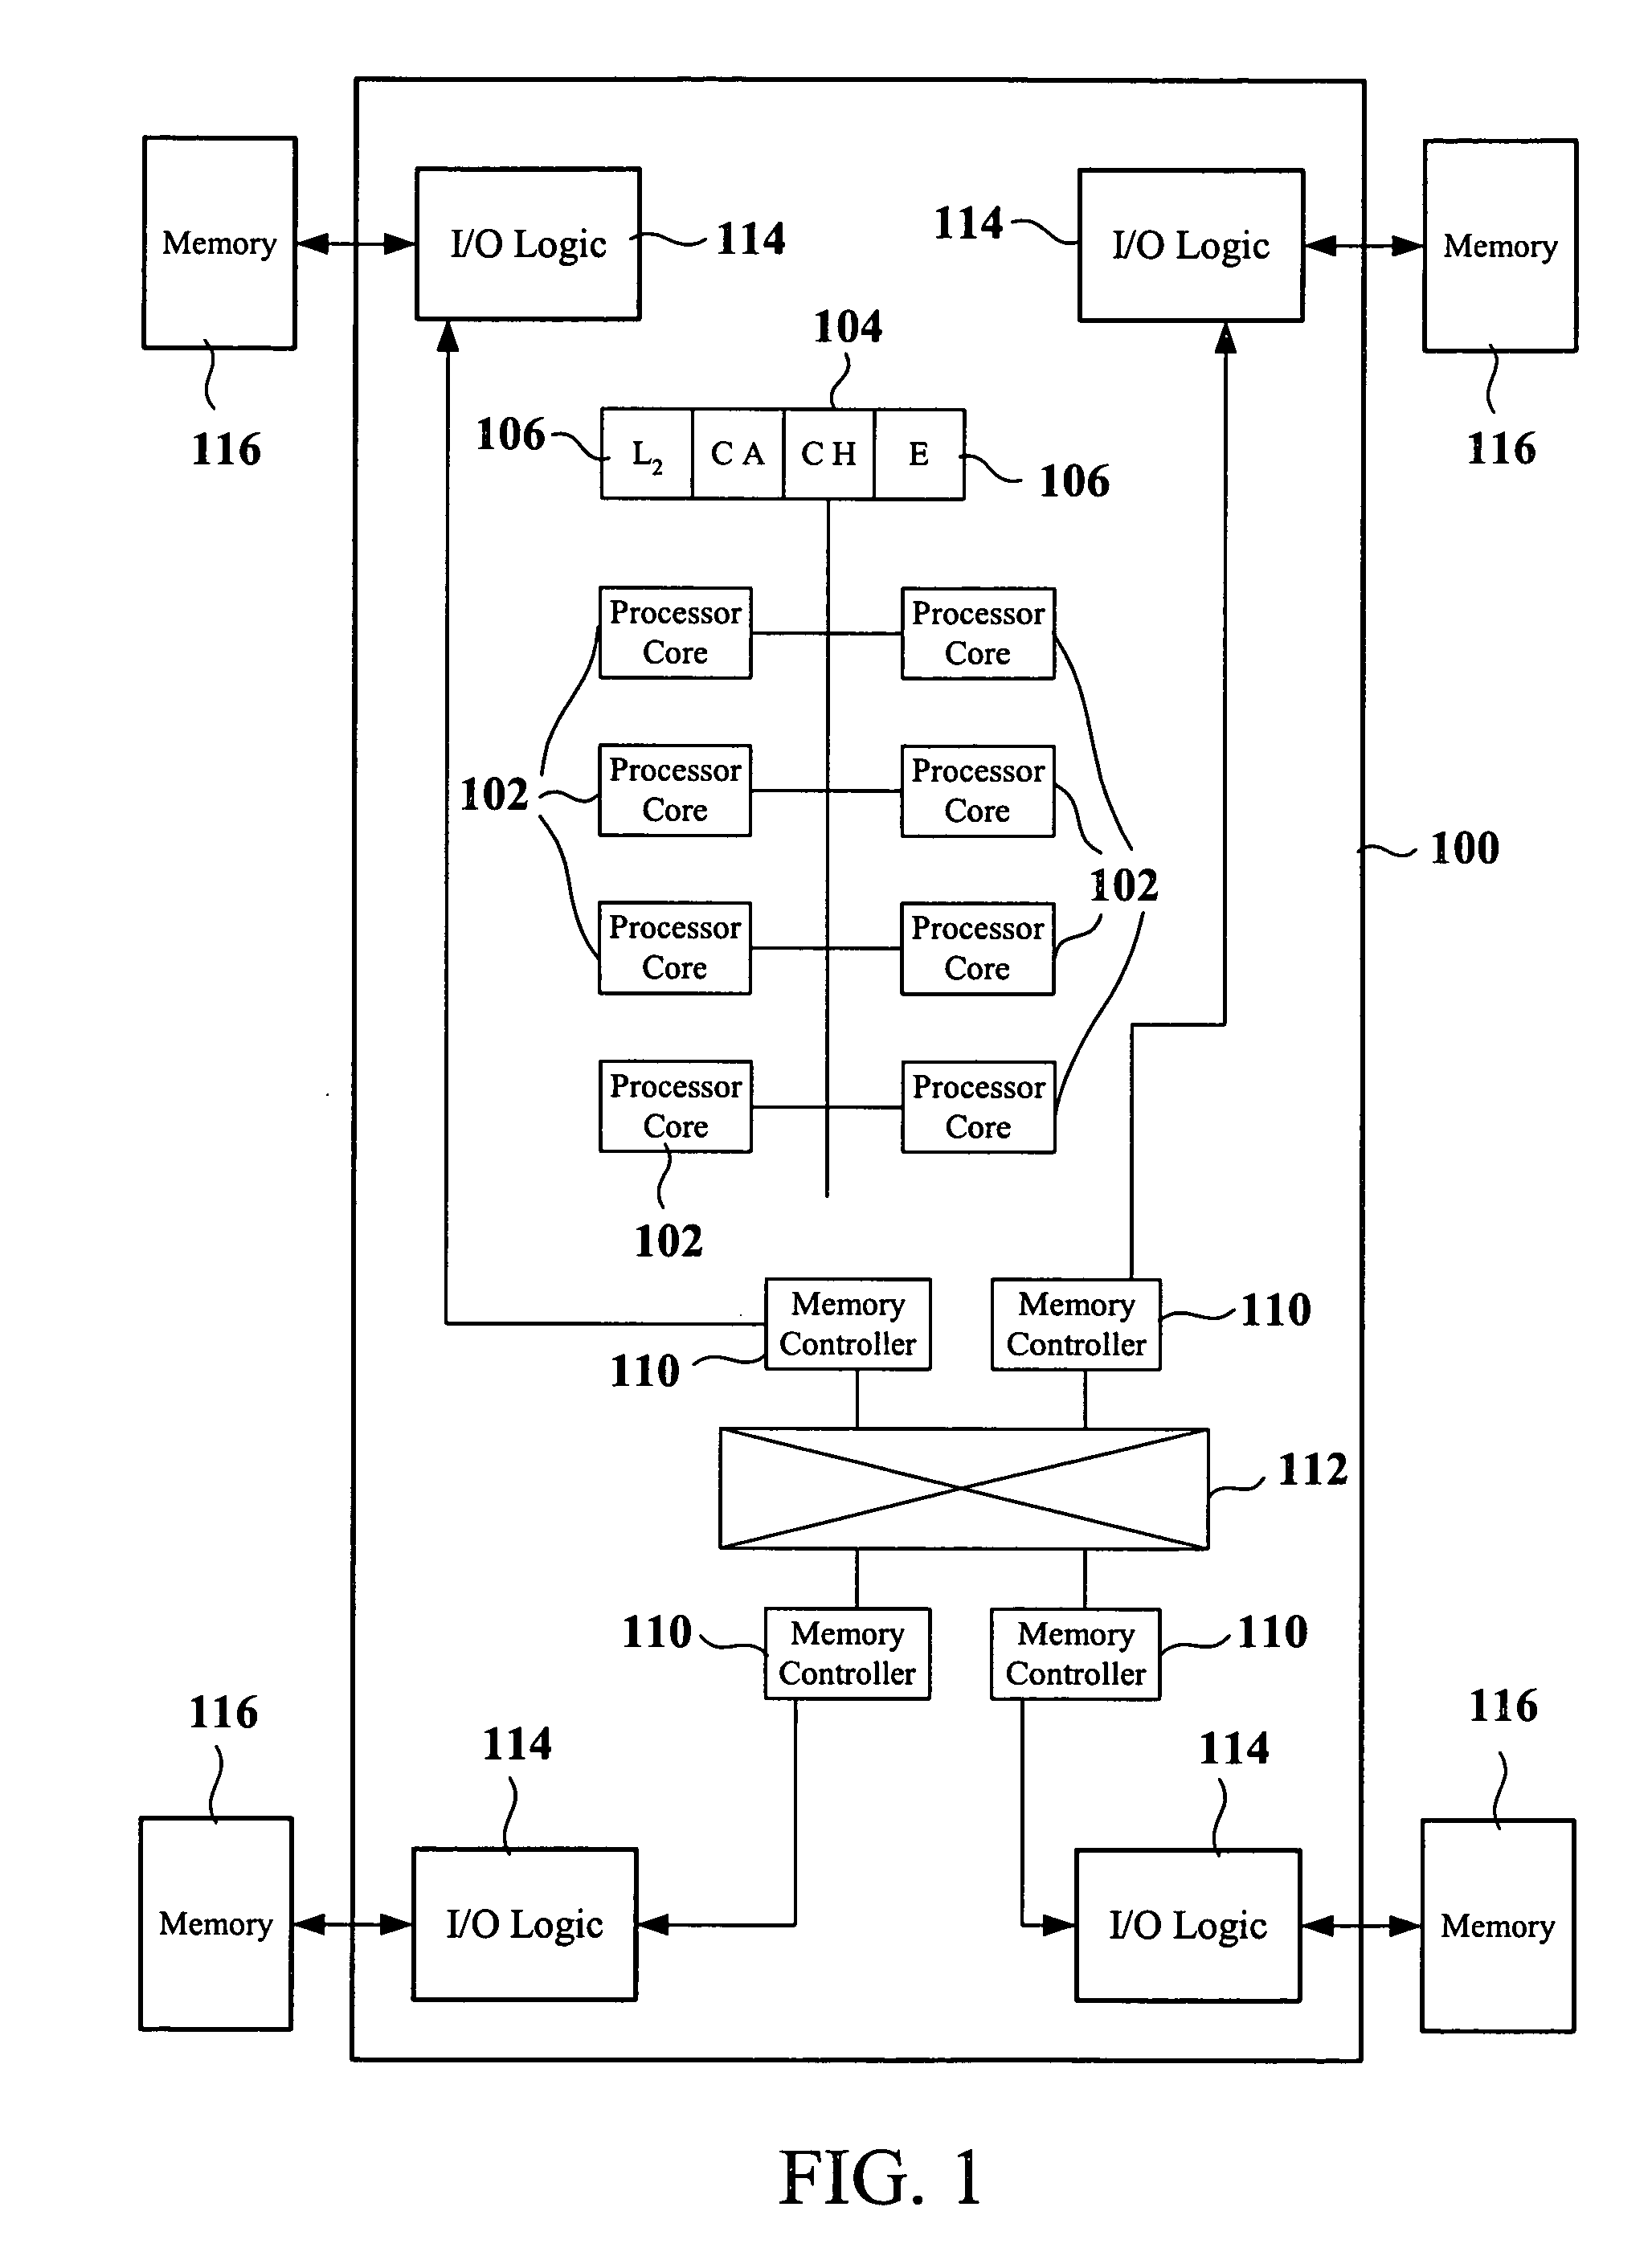 System and method for efficient power throttling in multiprocessor chip